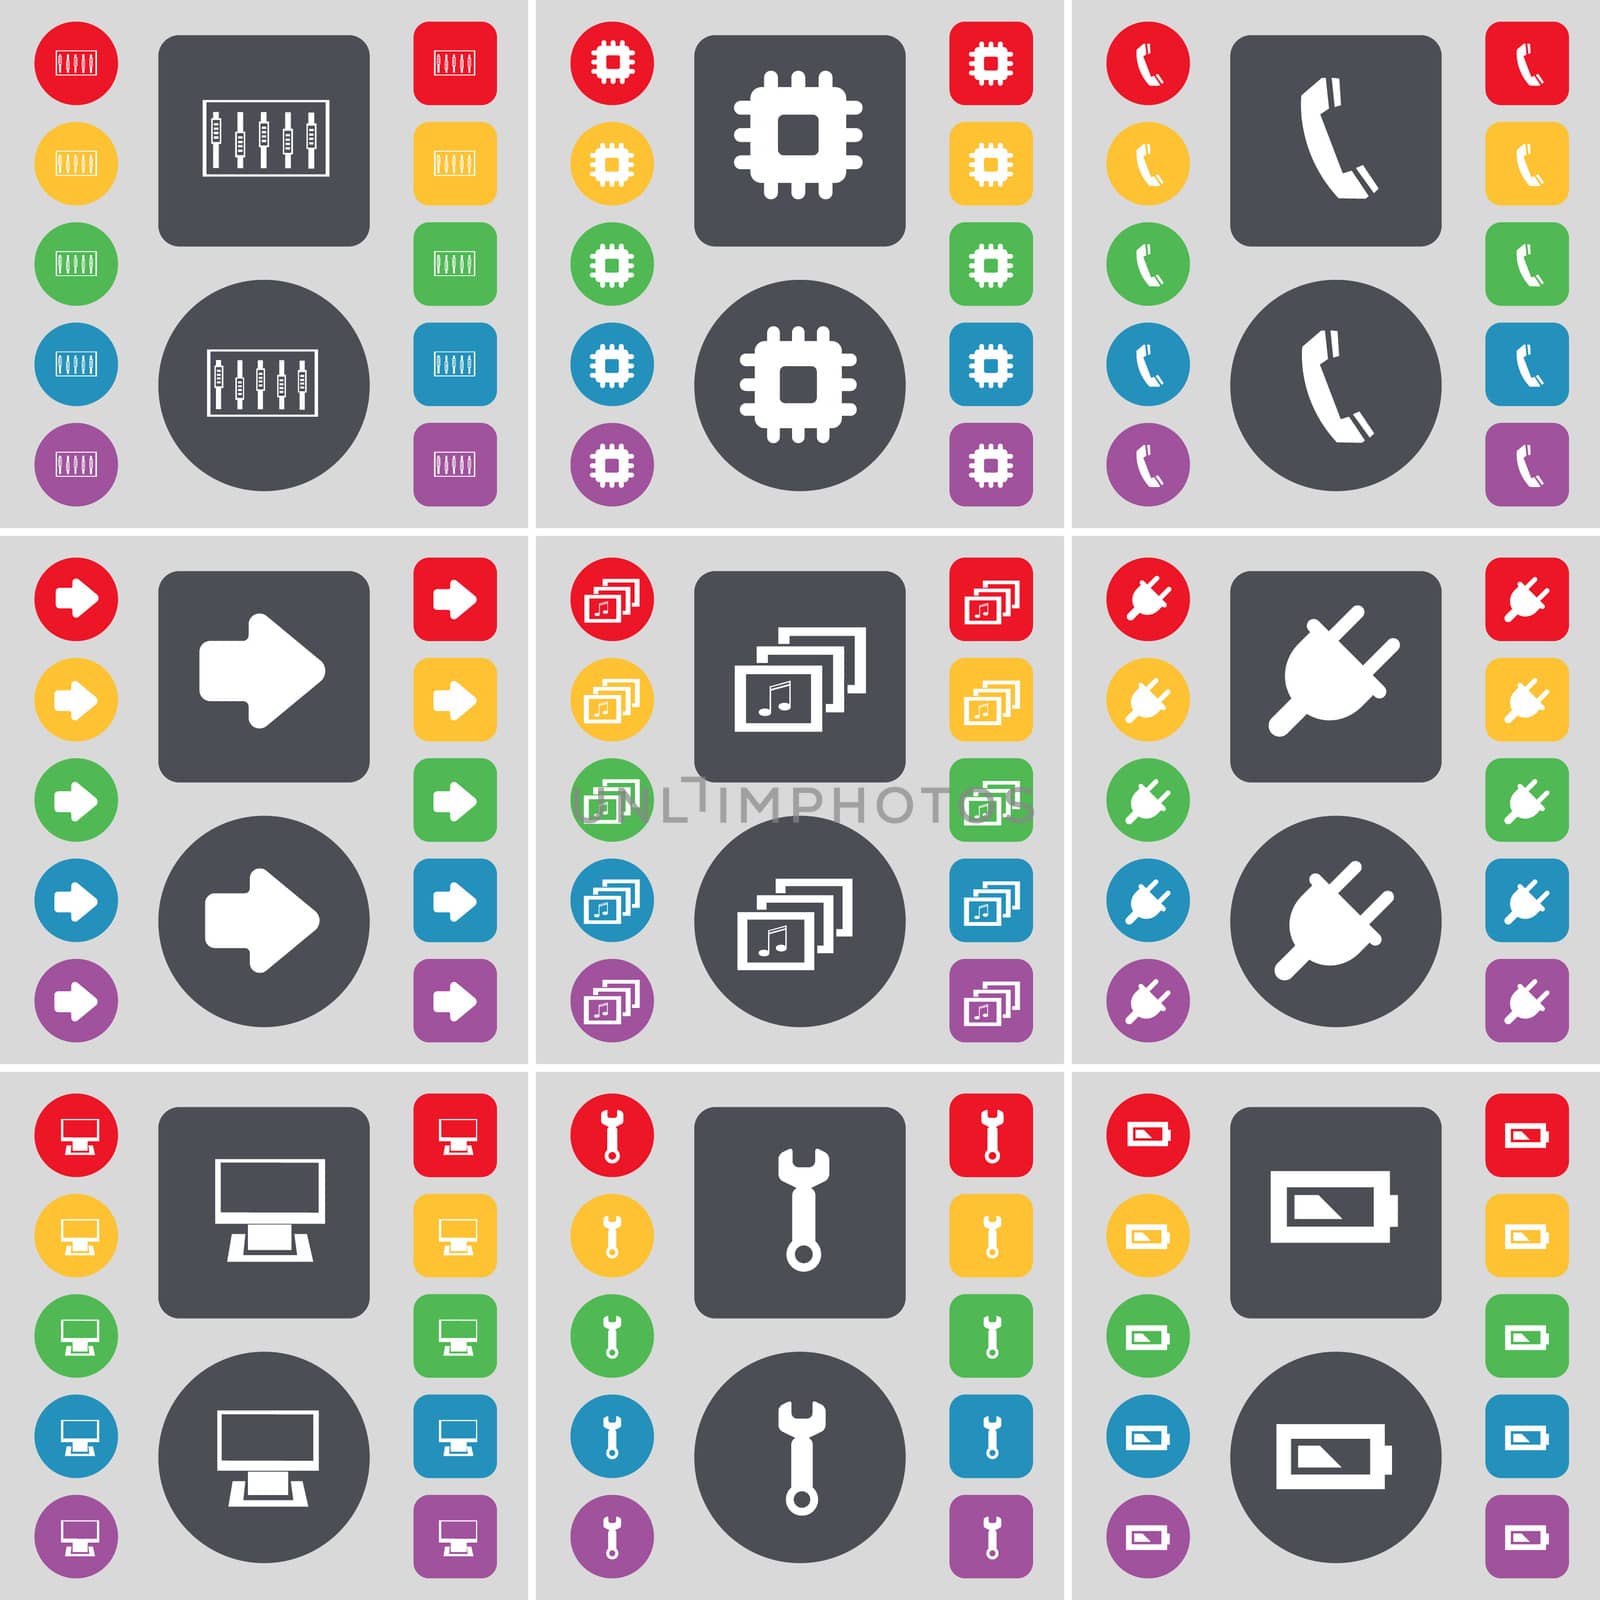 Equalizer, Processor, Receiver, Arrow right, Gallery, Socket, Monitor, Wrench, Battery icon symbol. A large set of flat, colored buttons for your design.  by serhii_lohvyniuk